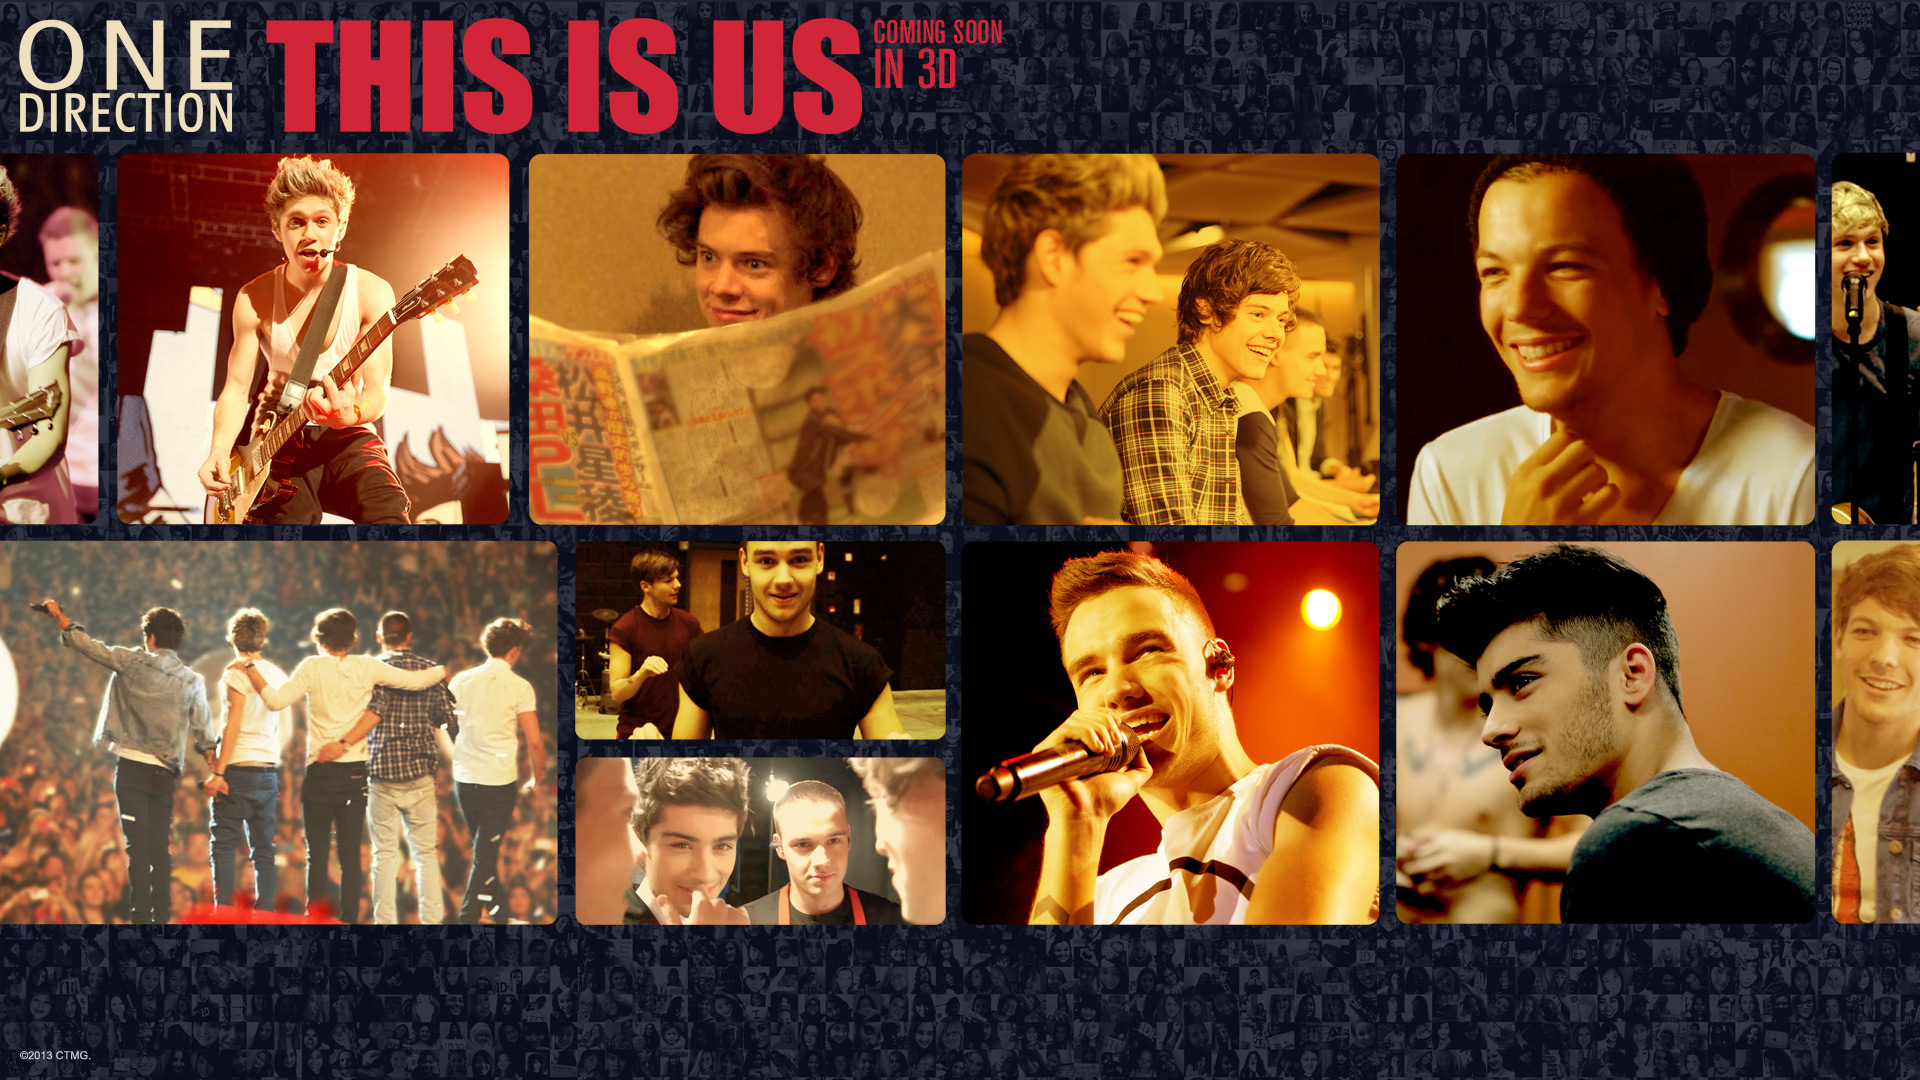 movie, one direction: this is us, music, one direction, singer